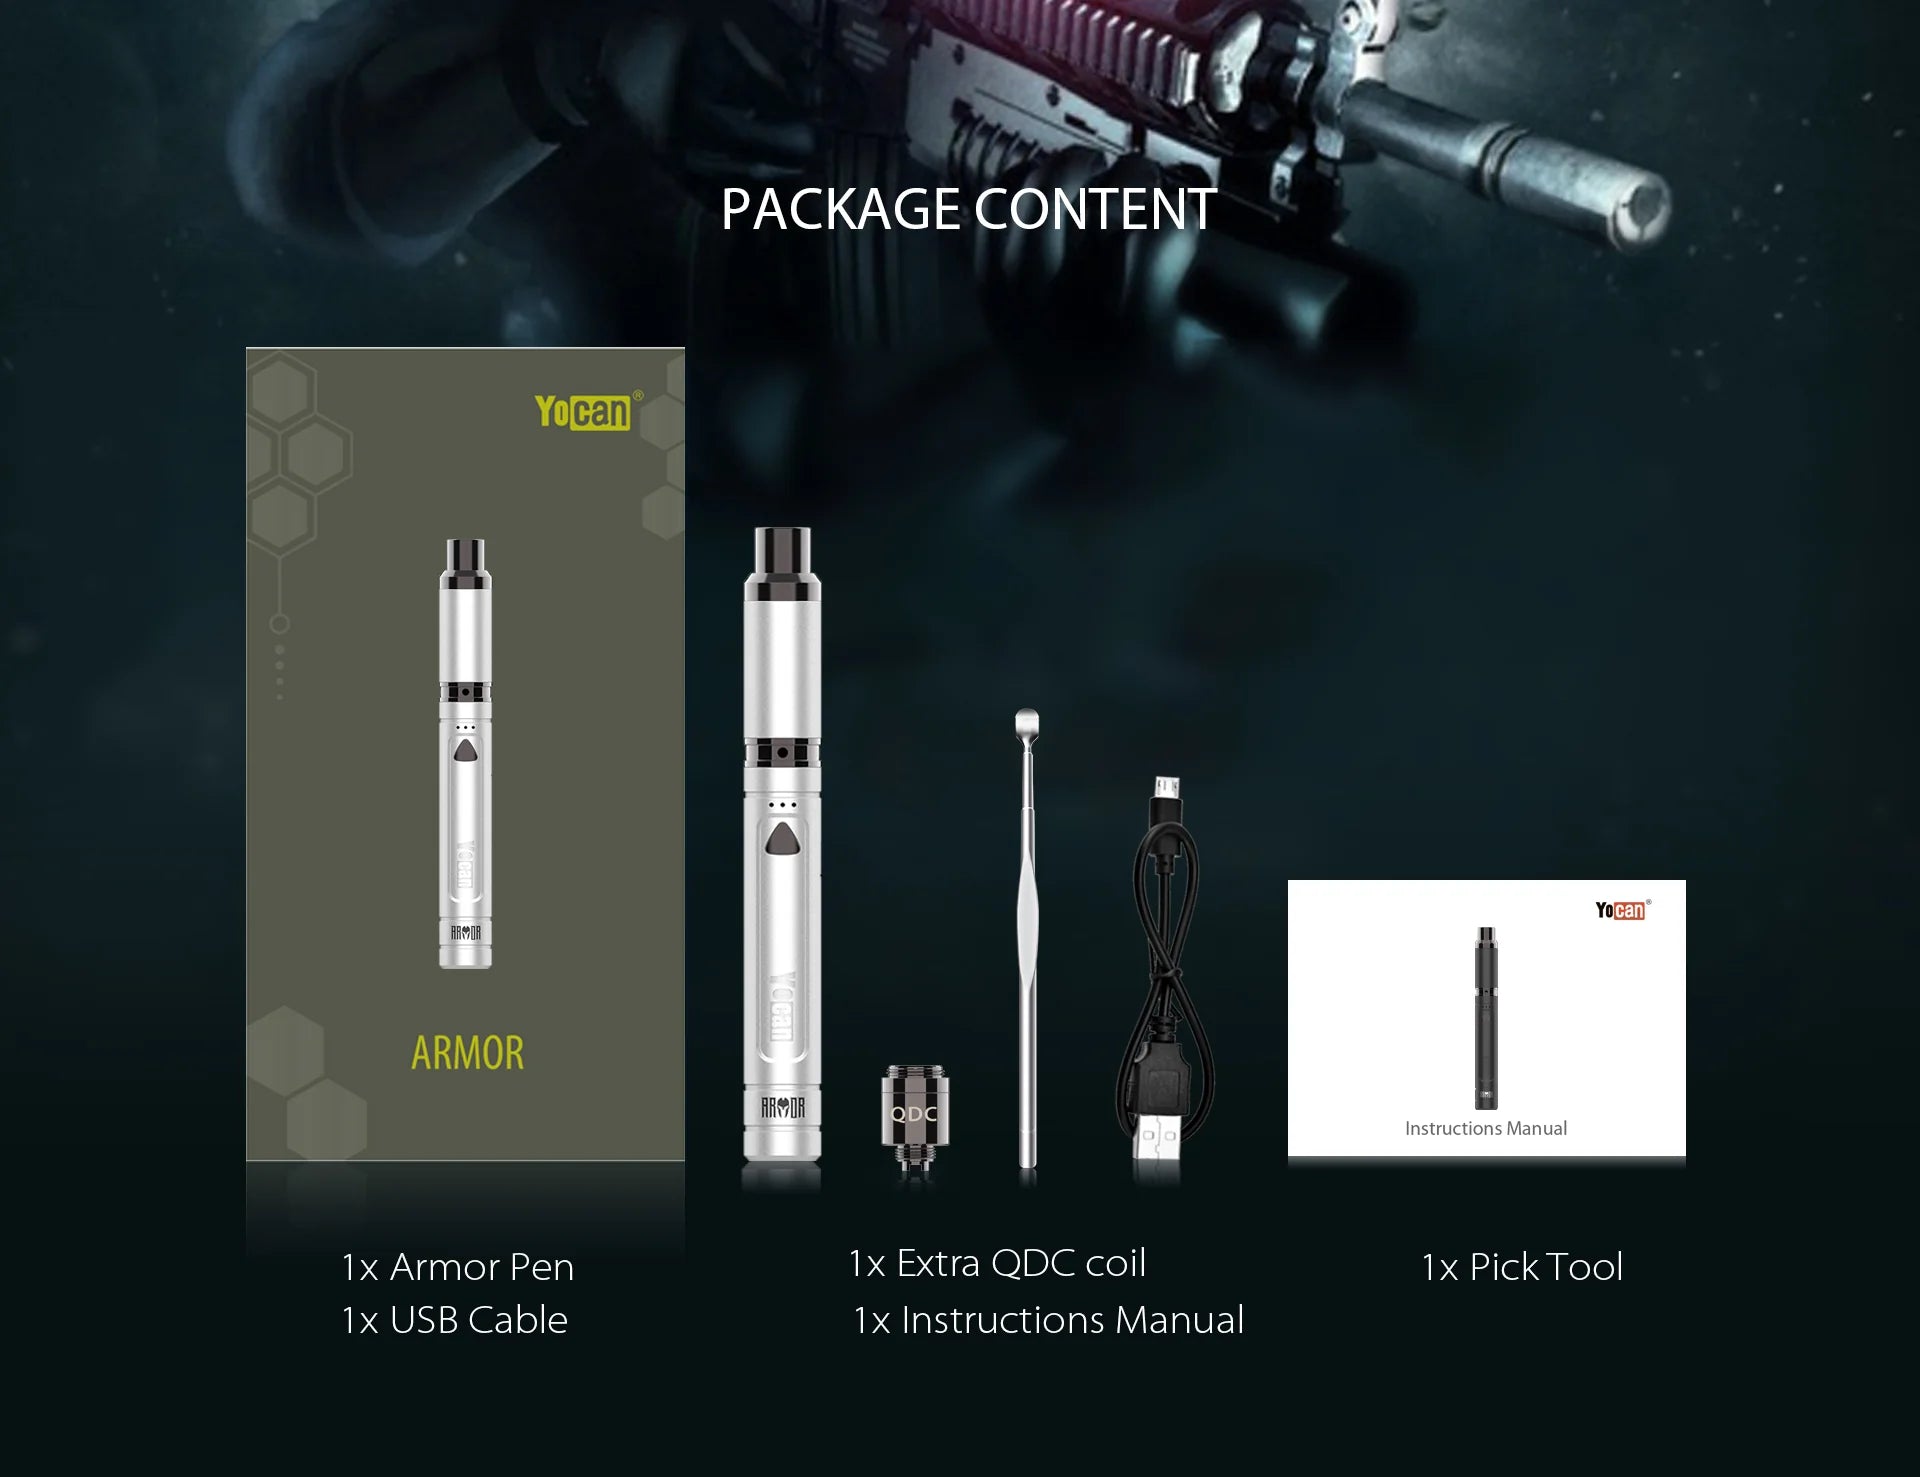 Yocan Armor Ultimate Concentrate Vaporizer